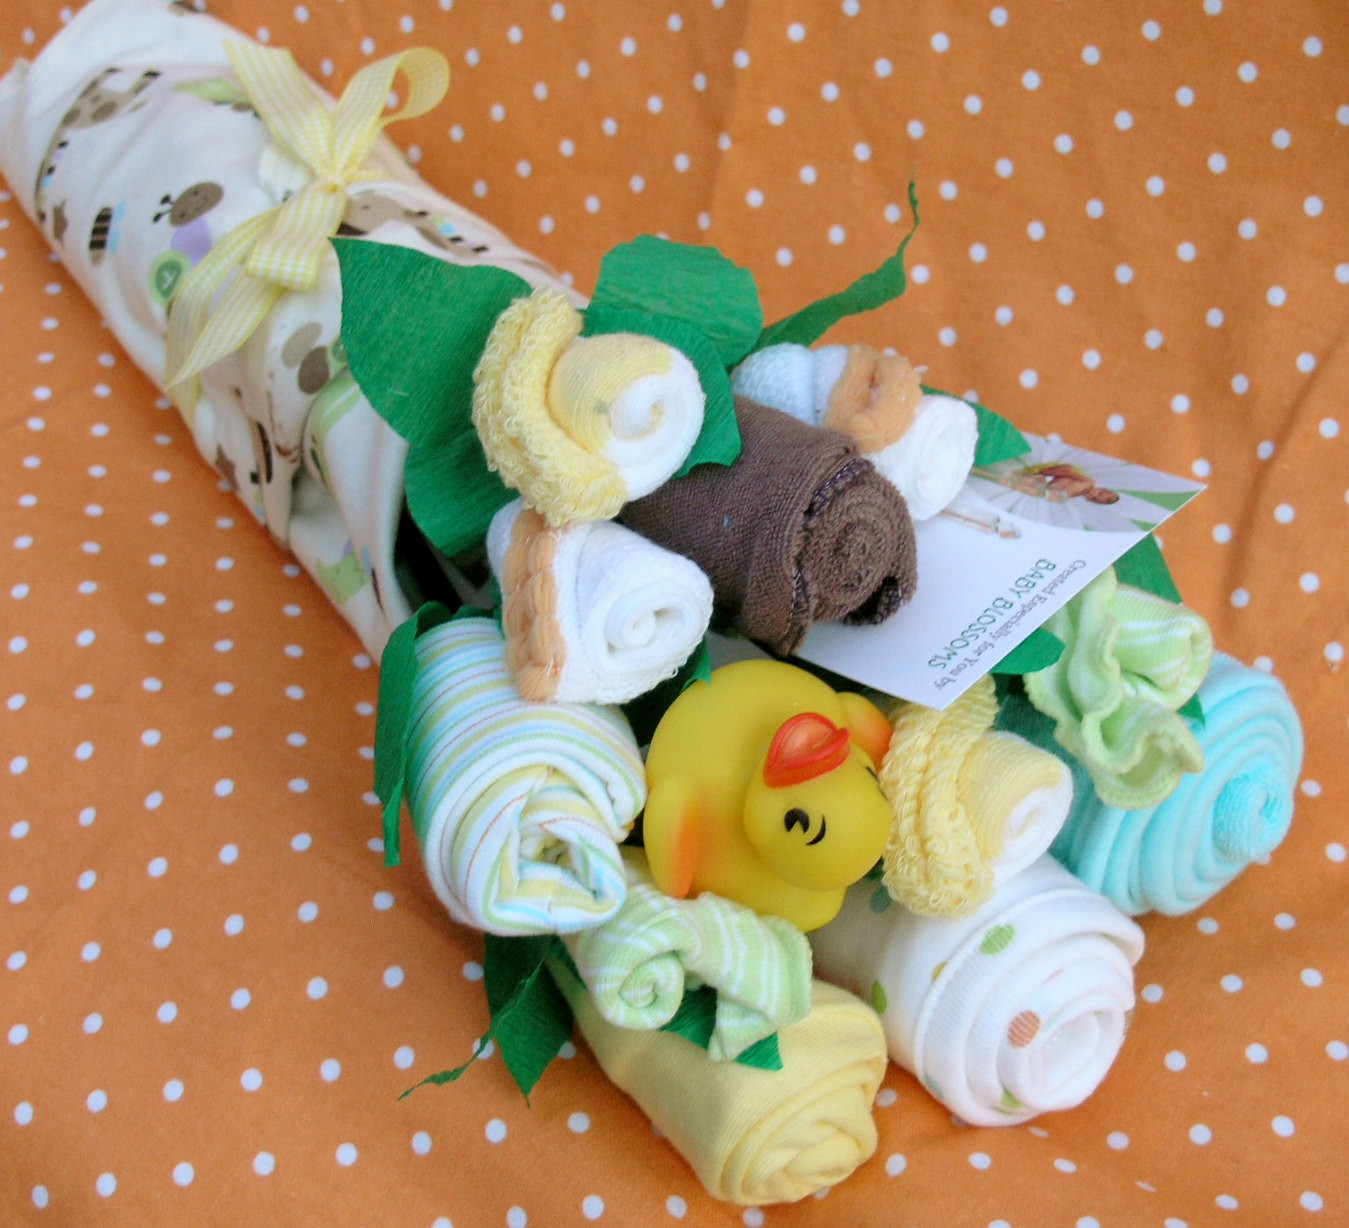 Neutral Baby Gift Ideas
 Gender Neutral Baby Shower Gift Bouquet by babyblossomco